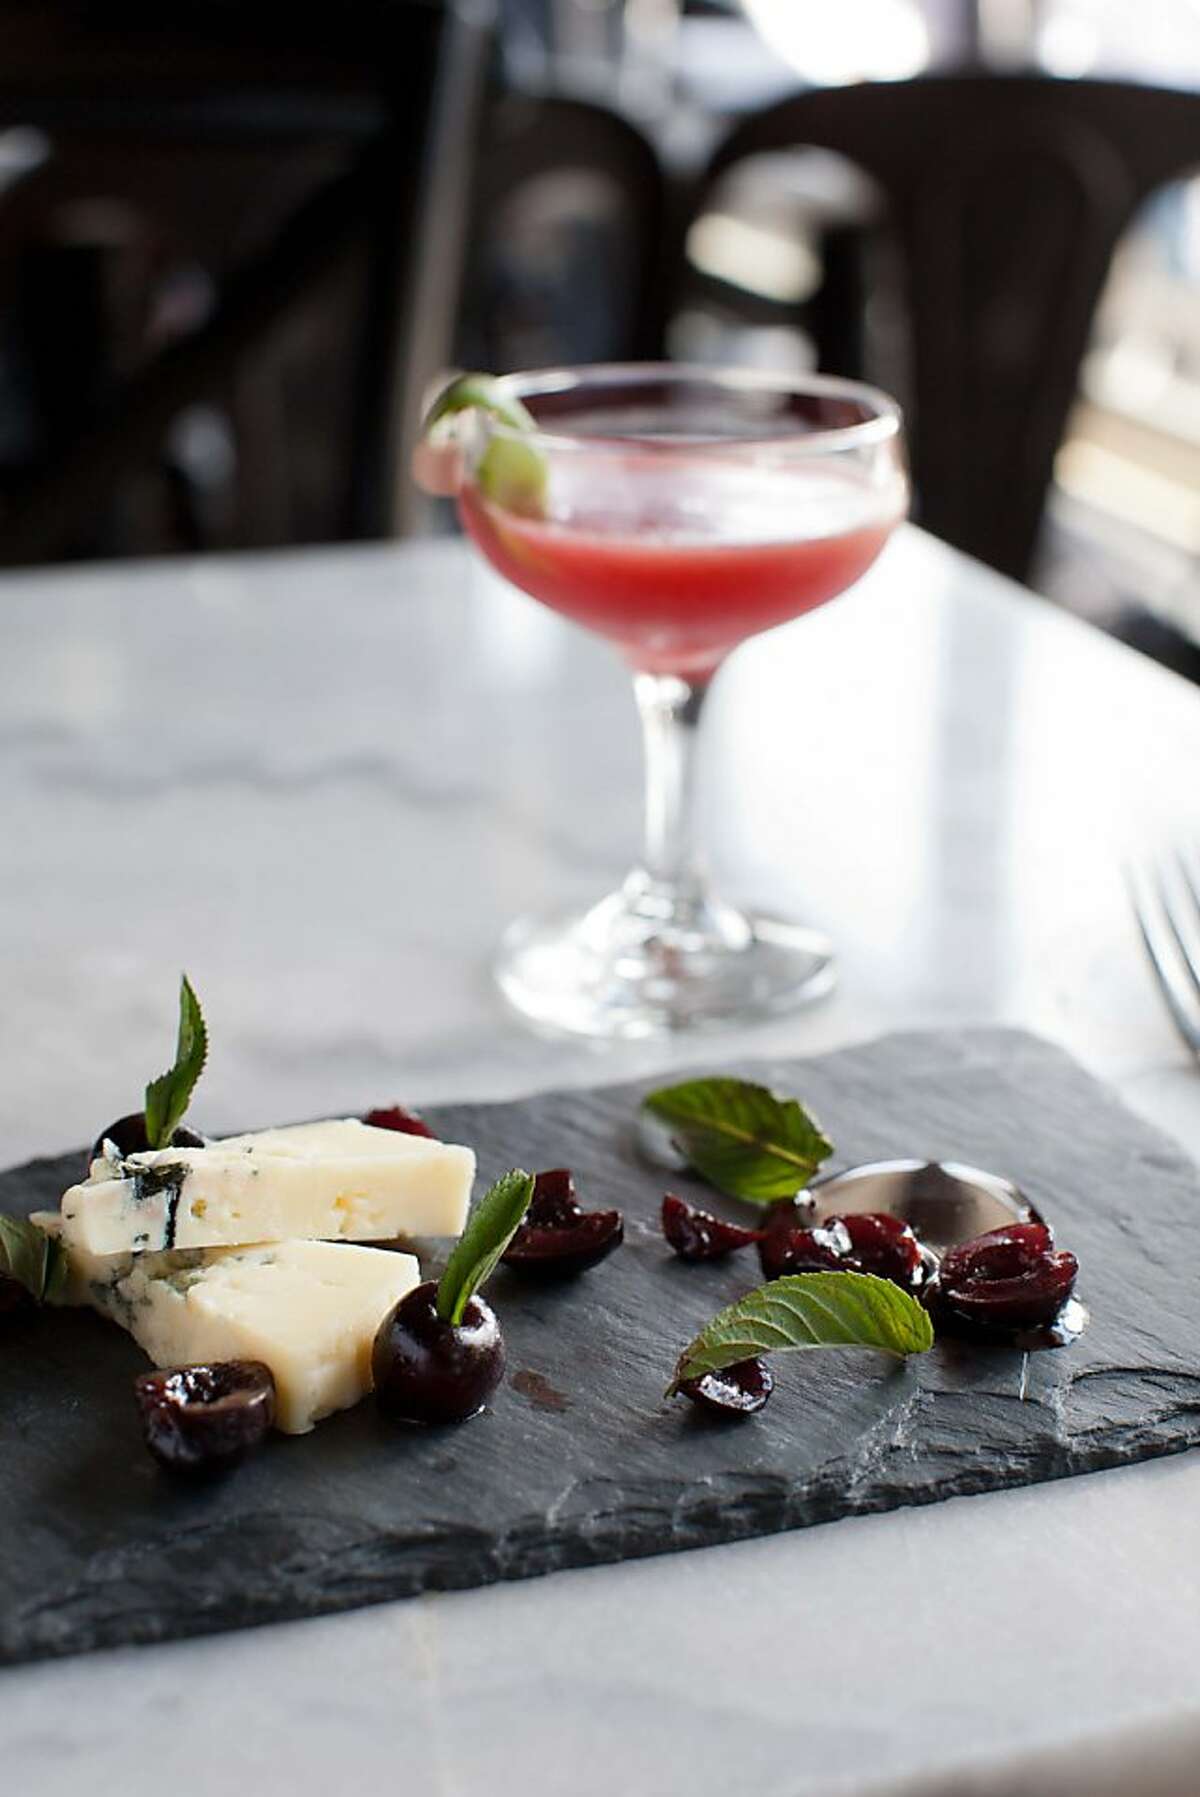 Park Tavern restaurant's new "Three Martini lunch and Summer Fridays" program features three courses, each paired with a martini-type drink, small in size so guests can indulge. Here, a dessert of Rogue Creamery blue cheese with smoked bing cherries, chocolate mint sauce and walnut bread is paired with a sour cherry daiquiri.